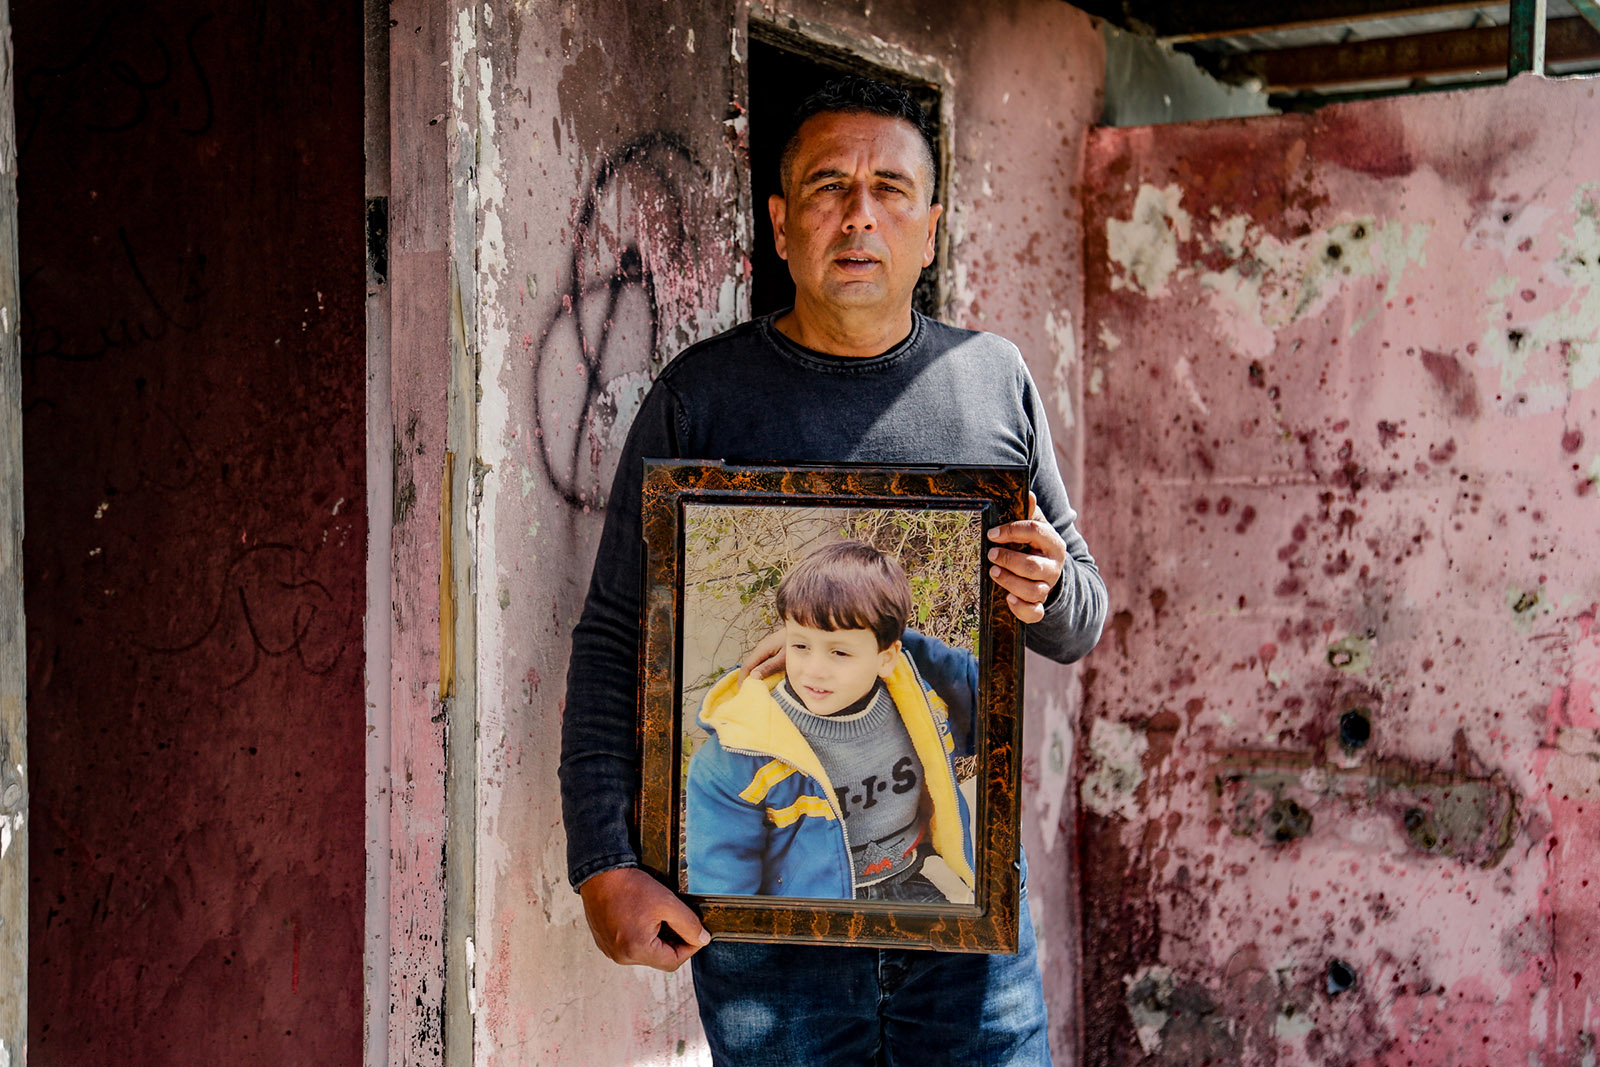 Abed Salama with a photograph of his son Milad, al-Bireh